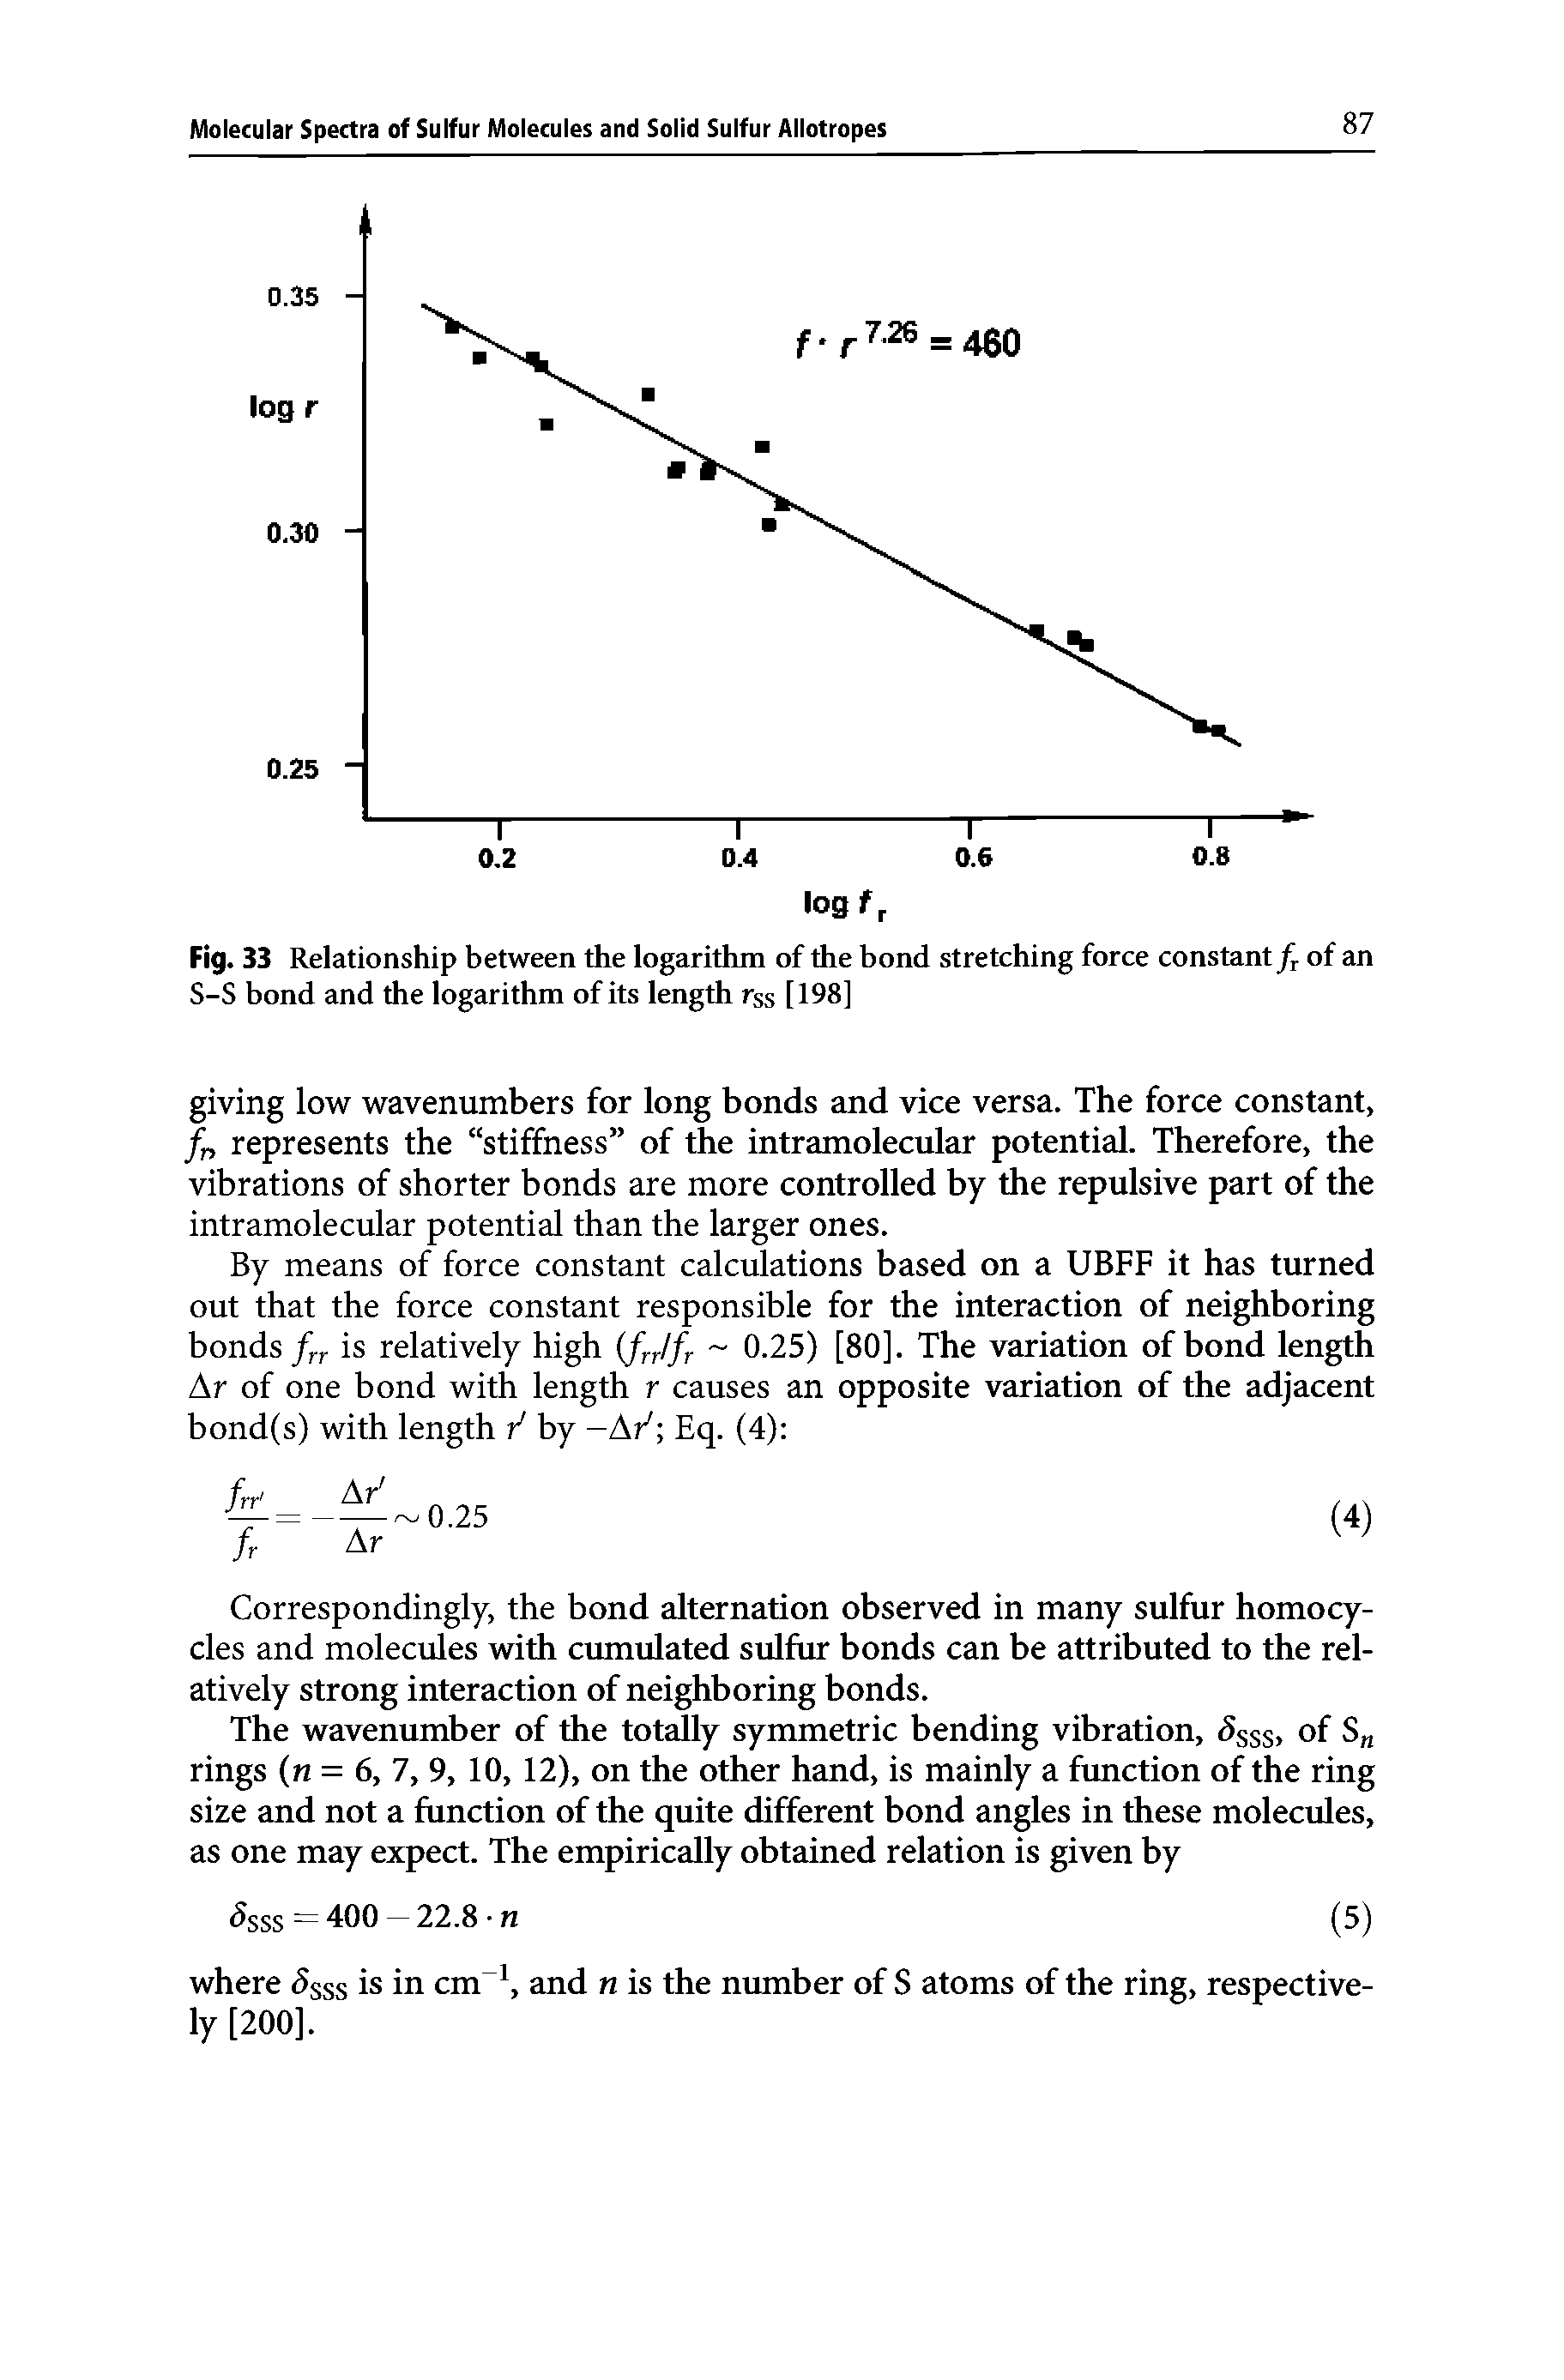 Fig. 33 Relationship between the logarithm of the bond stretching force constant/r of an S-S bond and the logarithm of its length rss [198]...